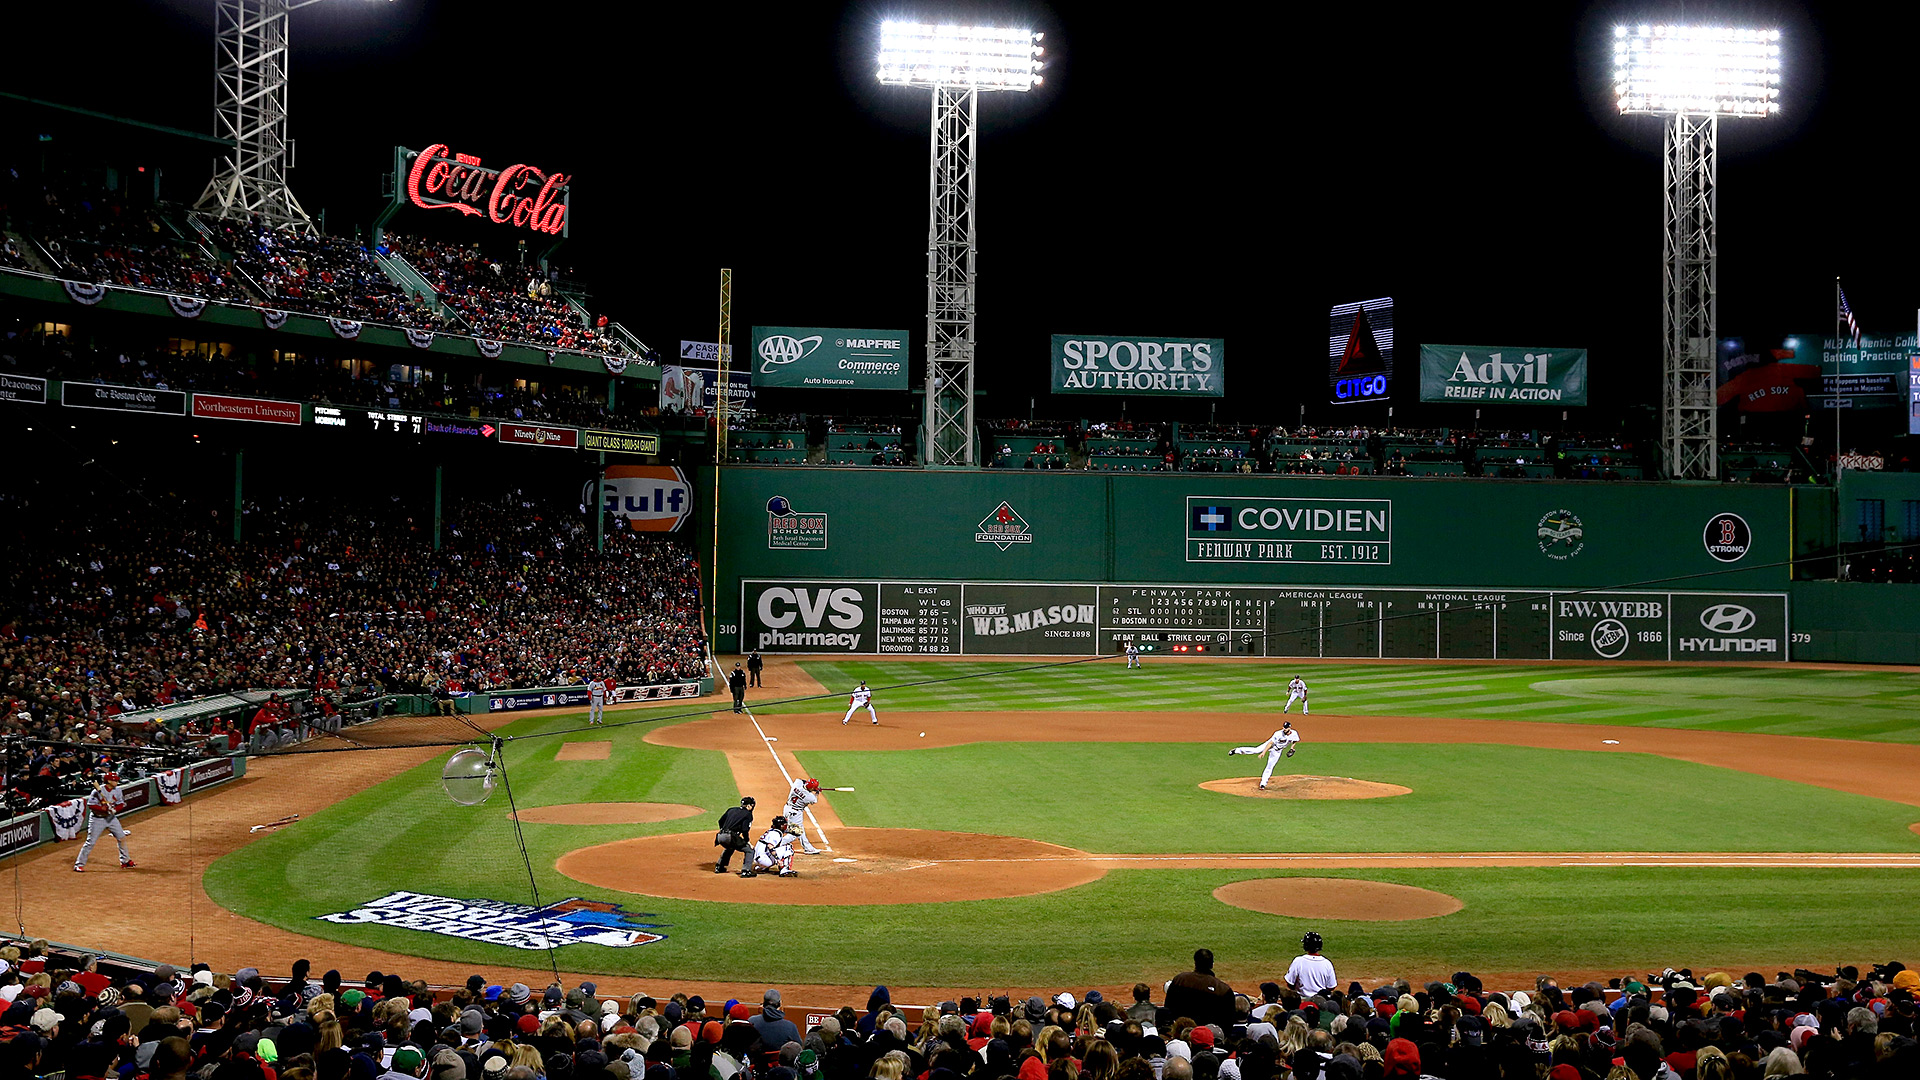 Boston College And Notre Dame In Talks For Football Game At Fenway